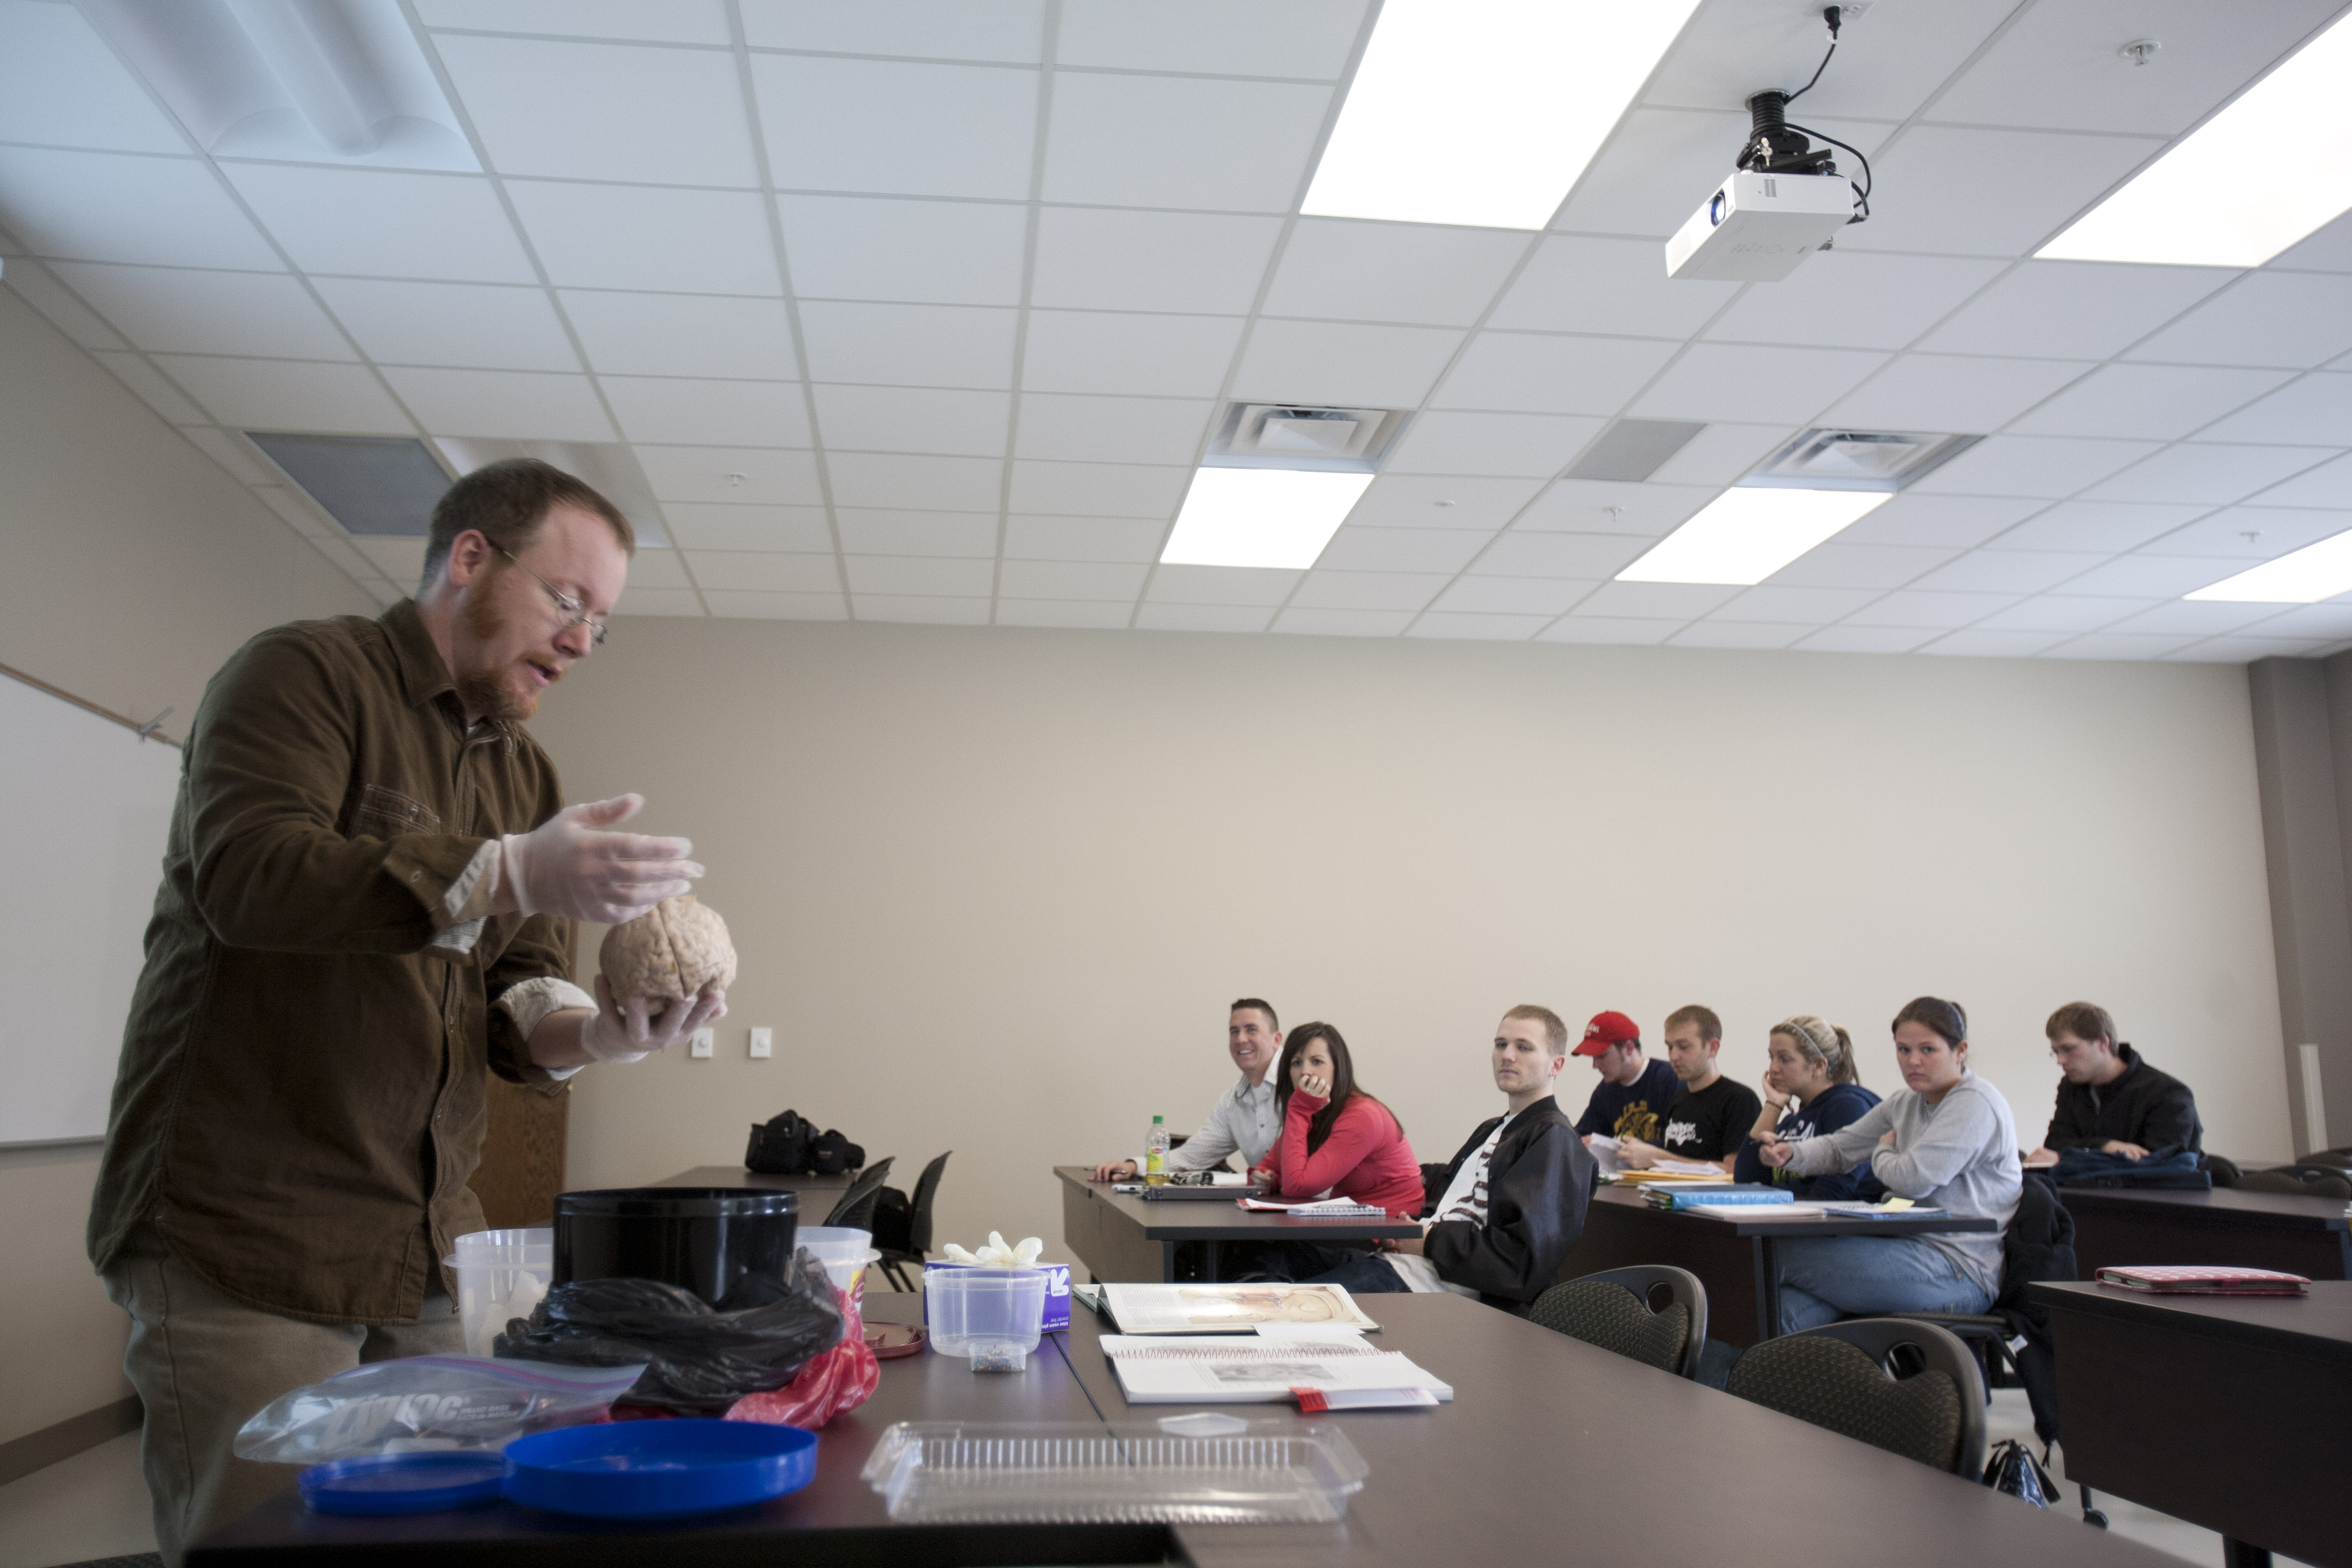 Dr. Hahn shows students a brain in class.